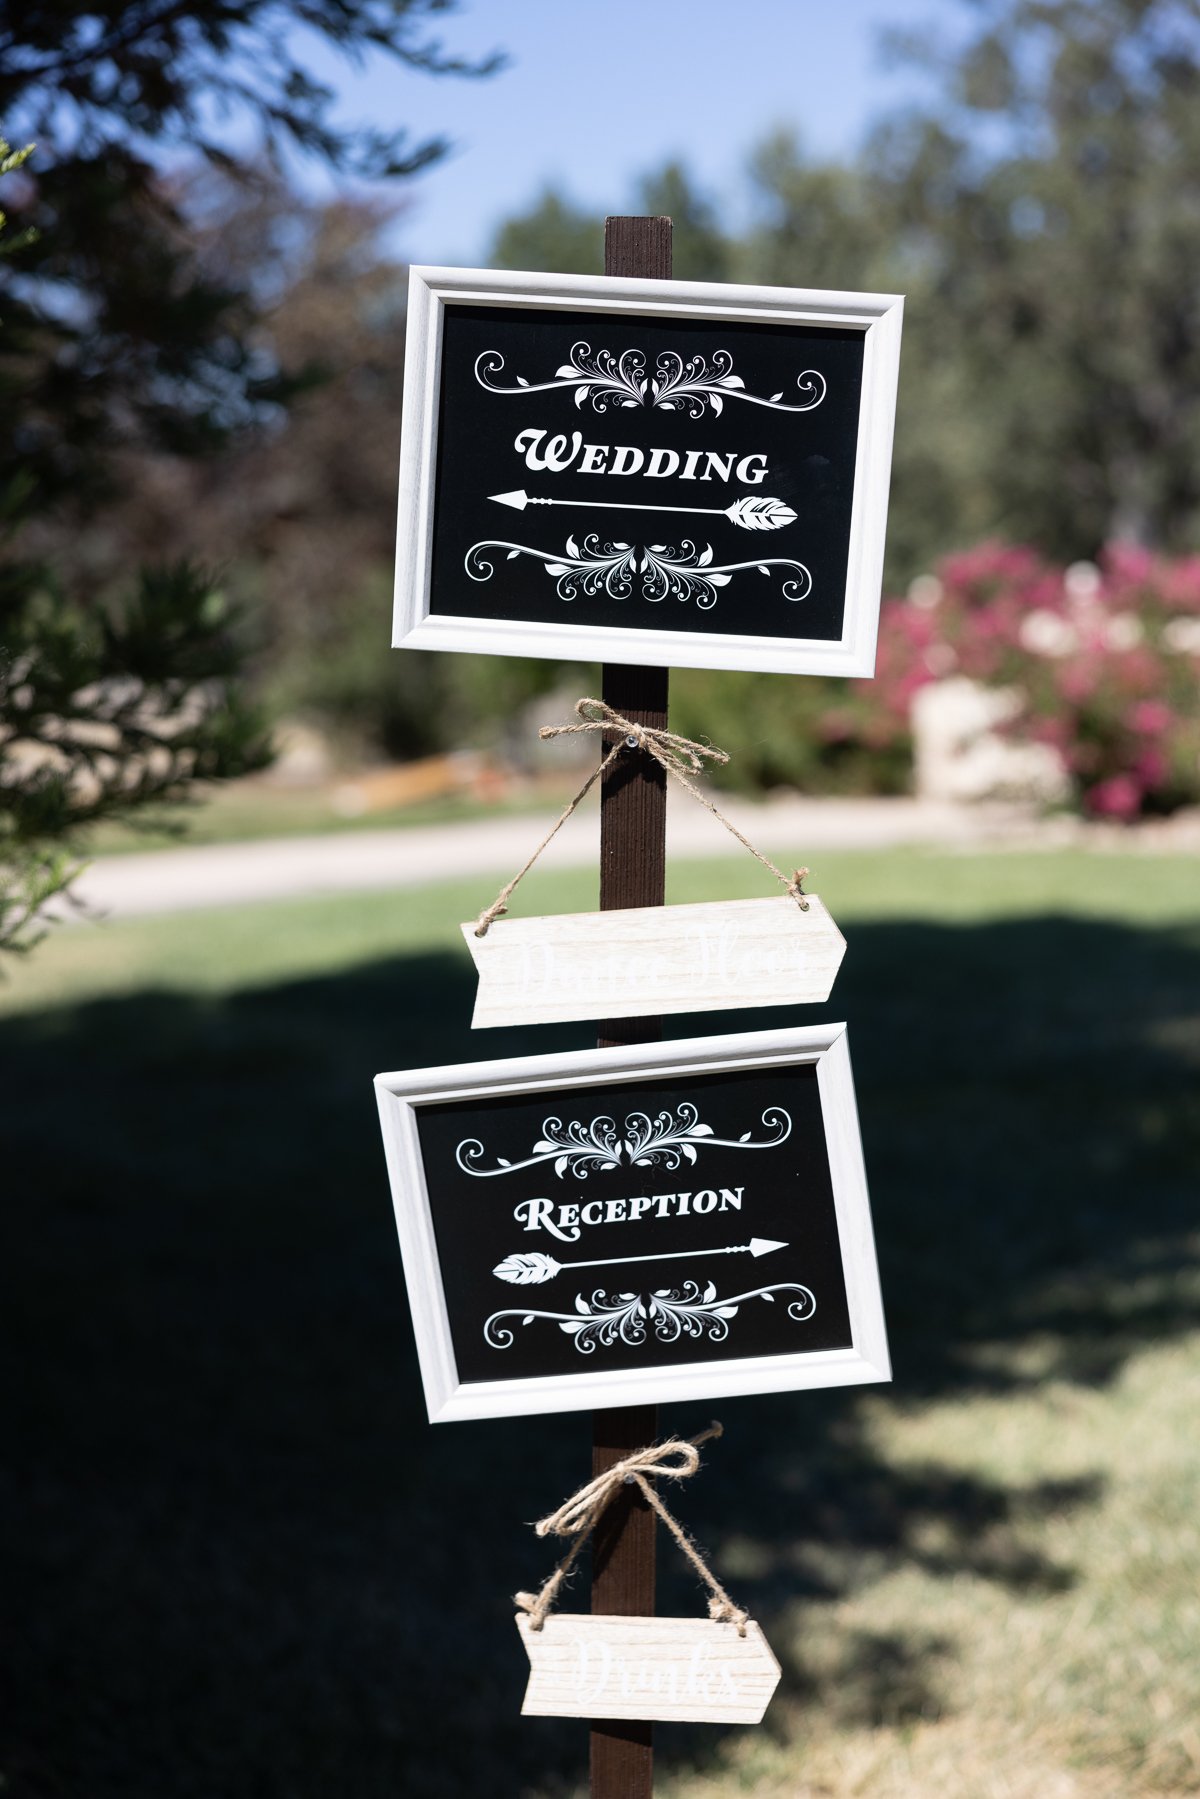    Charming wedding sign with romantic calligraphy, welcoming guests to the celebration, captured in a detail photograph.   